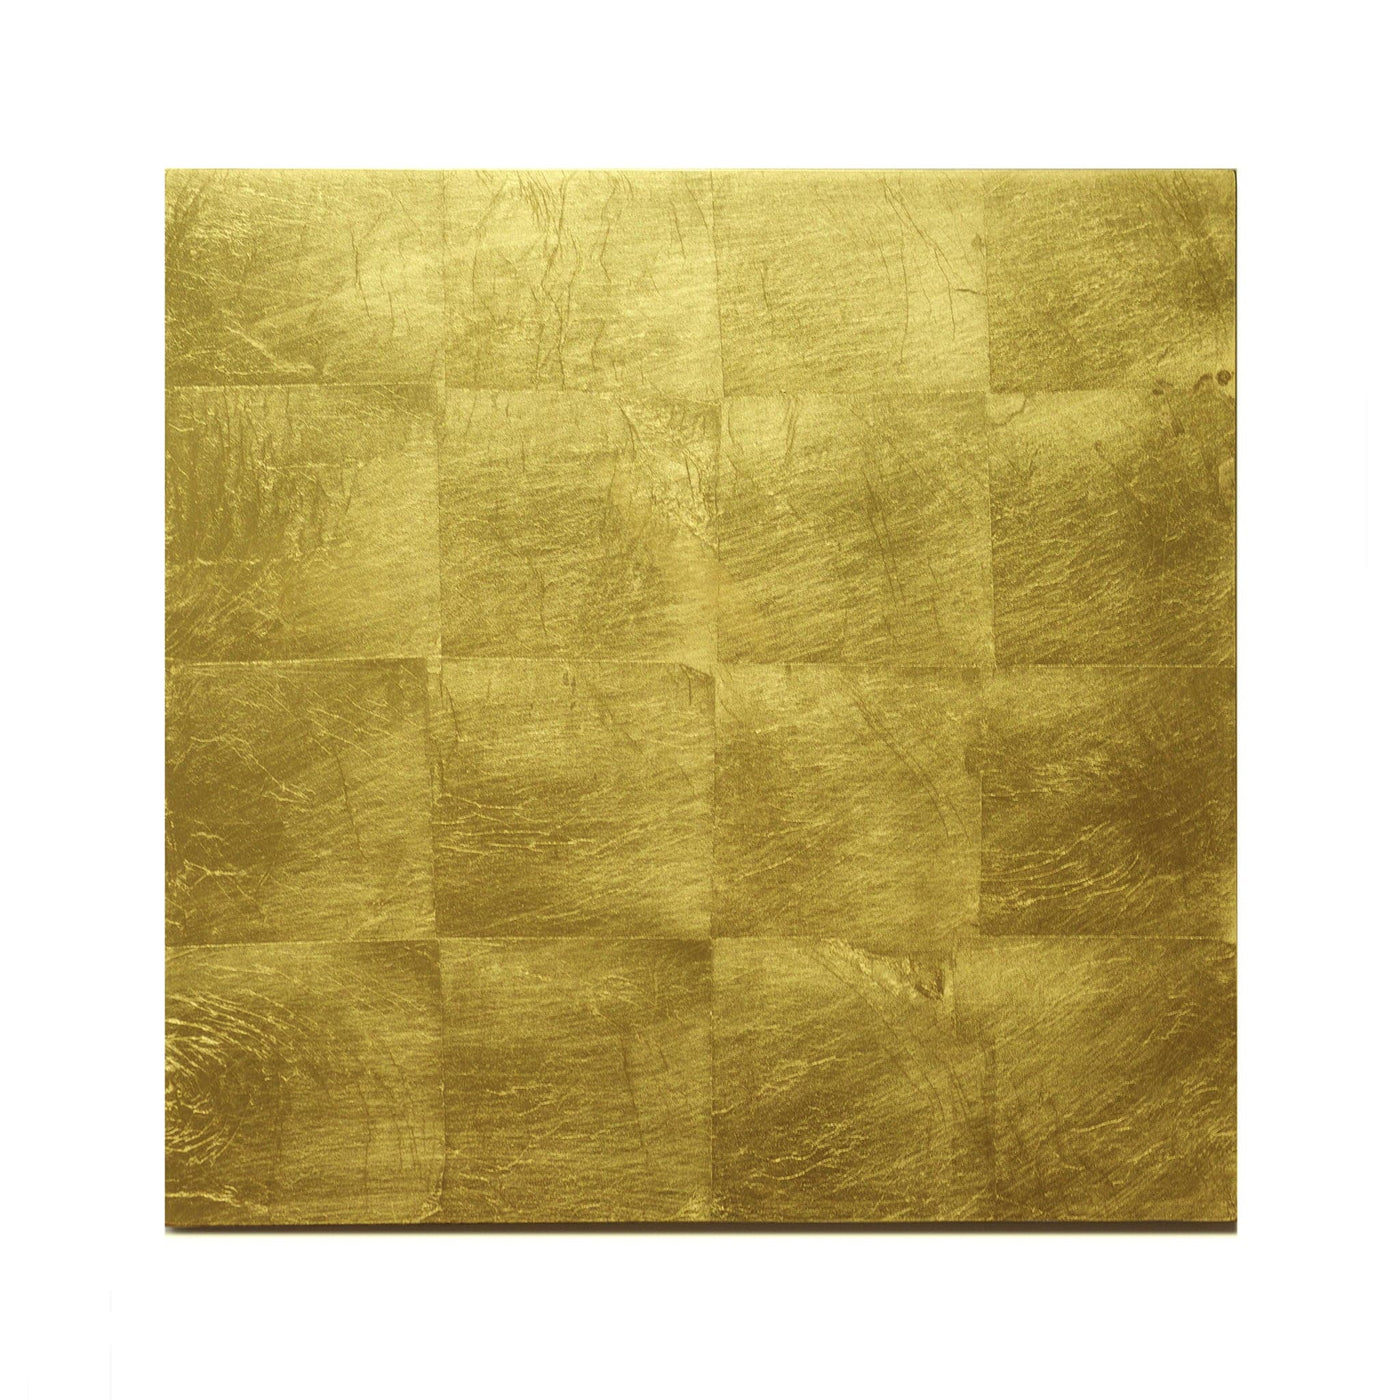 Placemat in Gold Leaf - Posh Trading Company  - Interior furnishings london